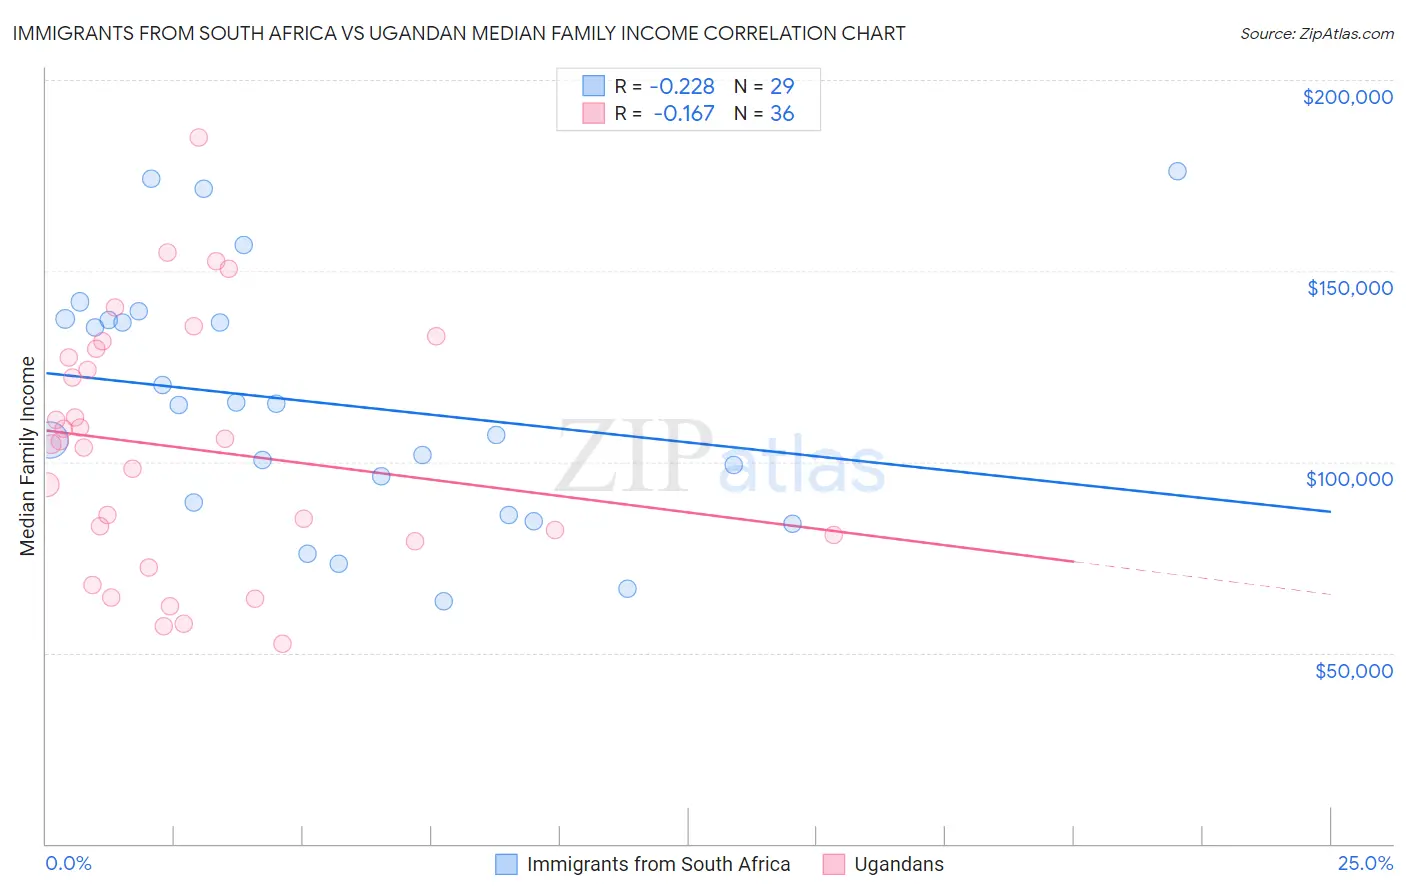 Immigrants from South Africa vs Ugandan Median Family Income